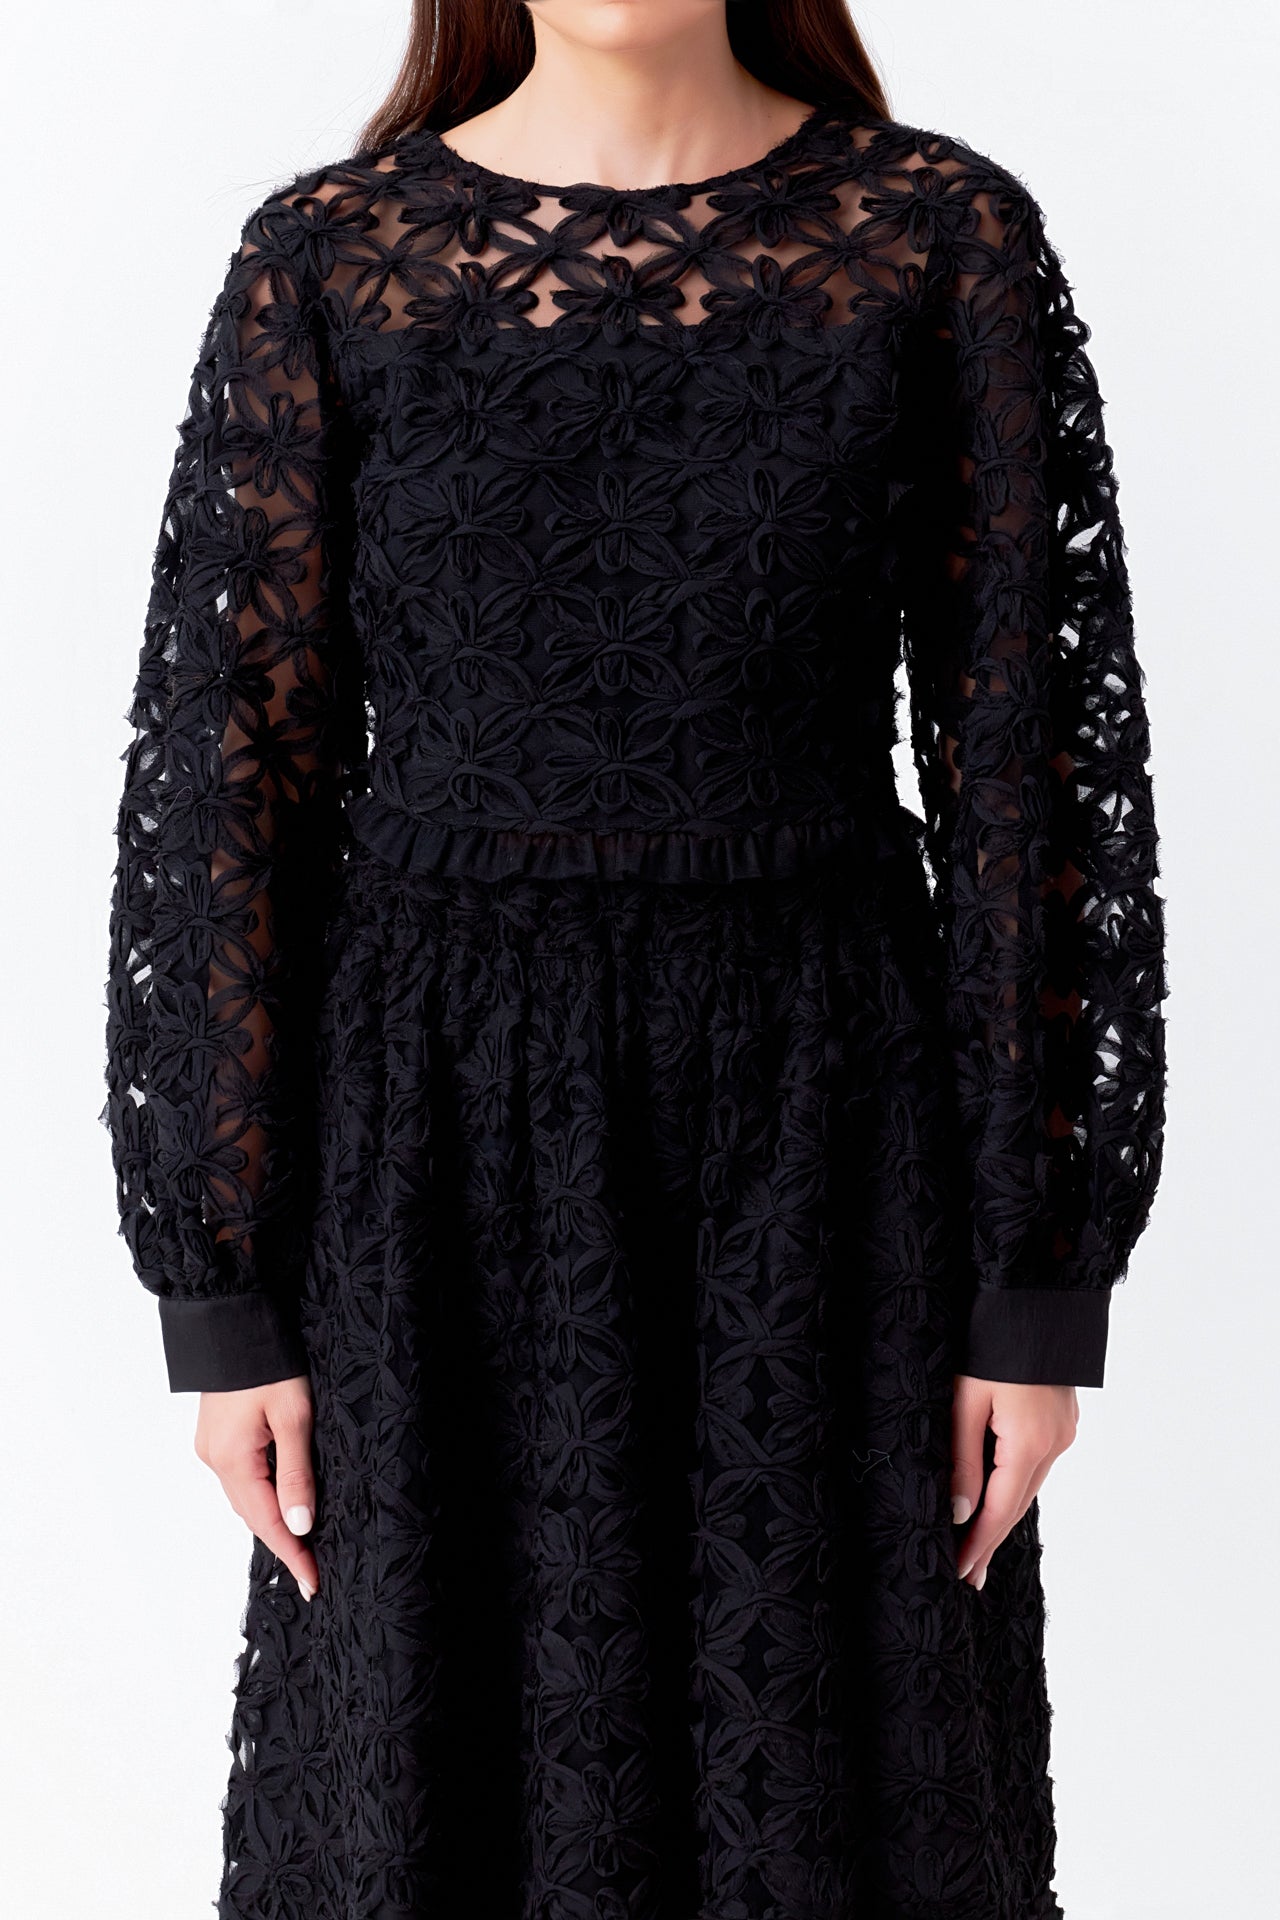 ENDLESS ROSE - Floral Lace Long Sleeve Top - TOPS available at Objectrare